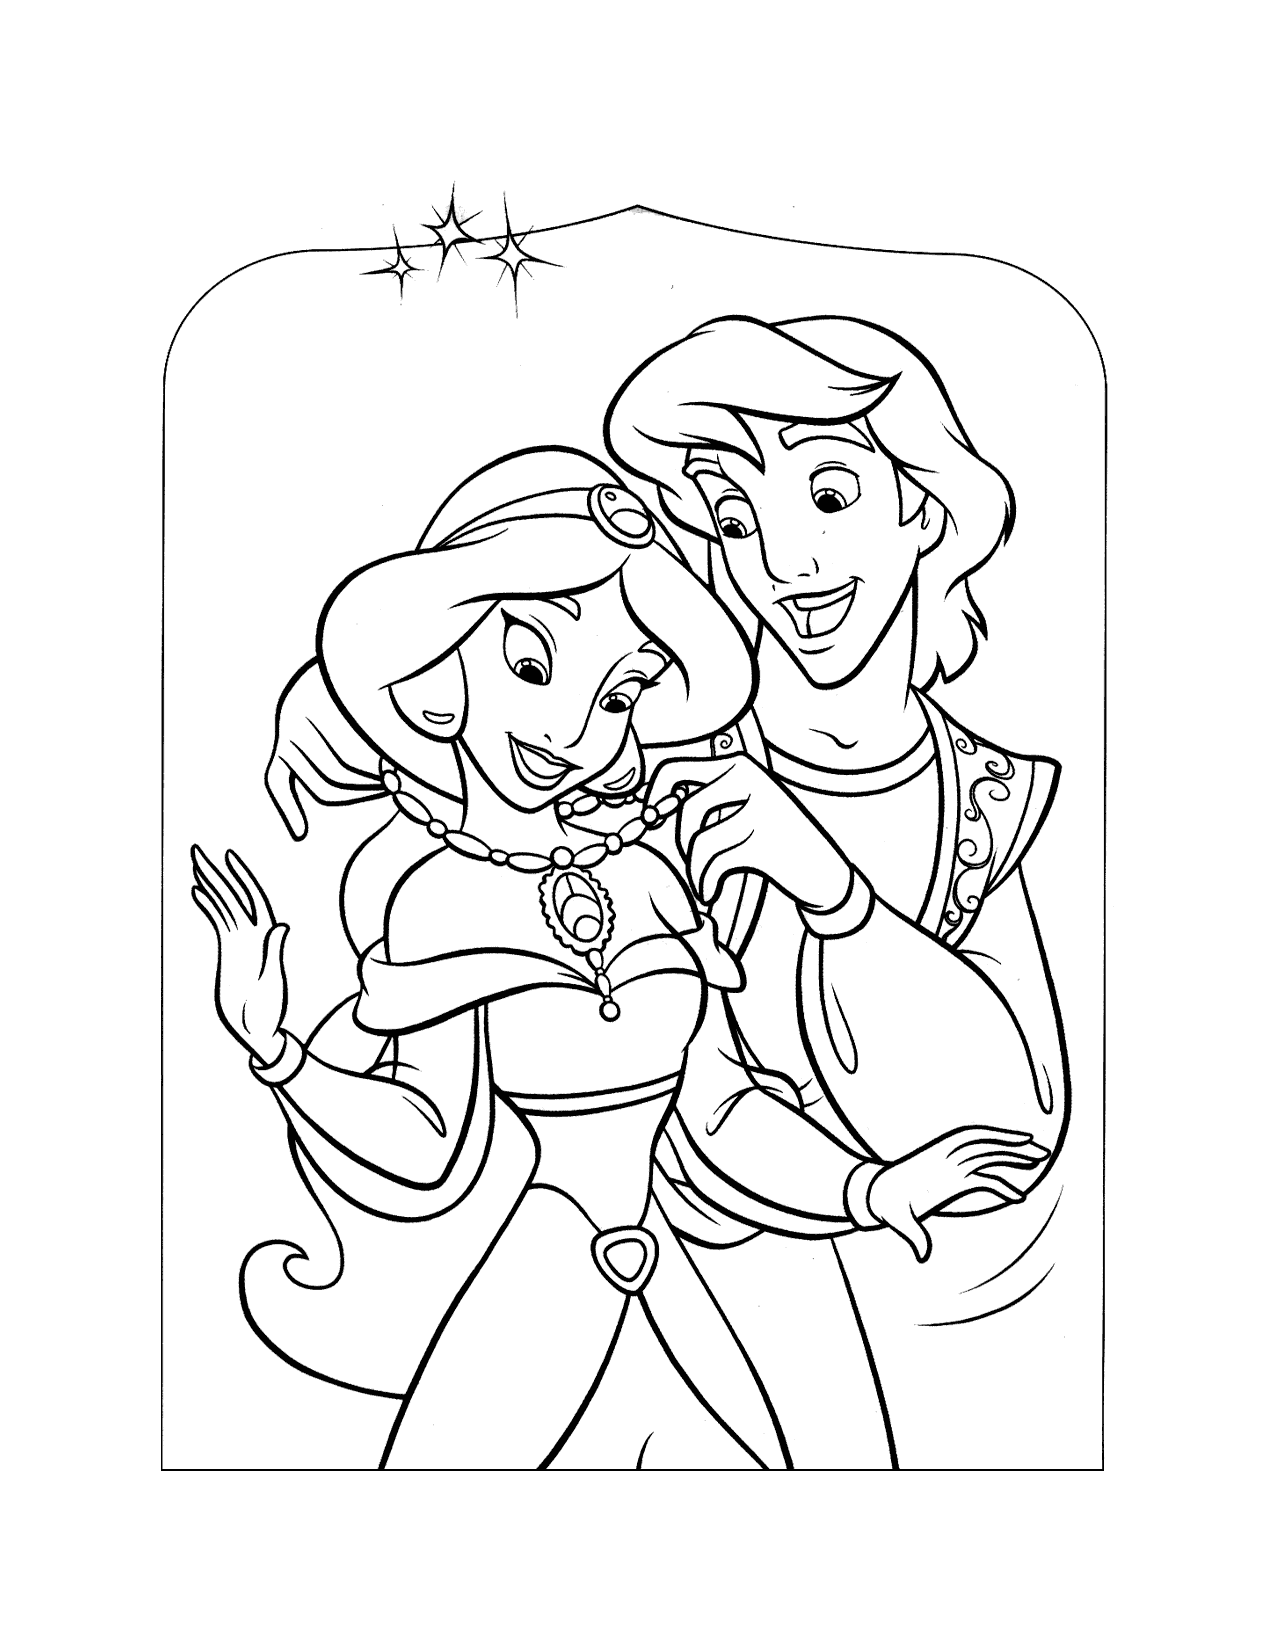 Aladdin Gives Jasmine A Necklace Coloring Page